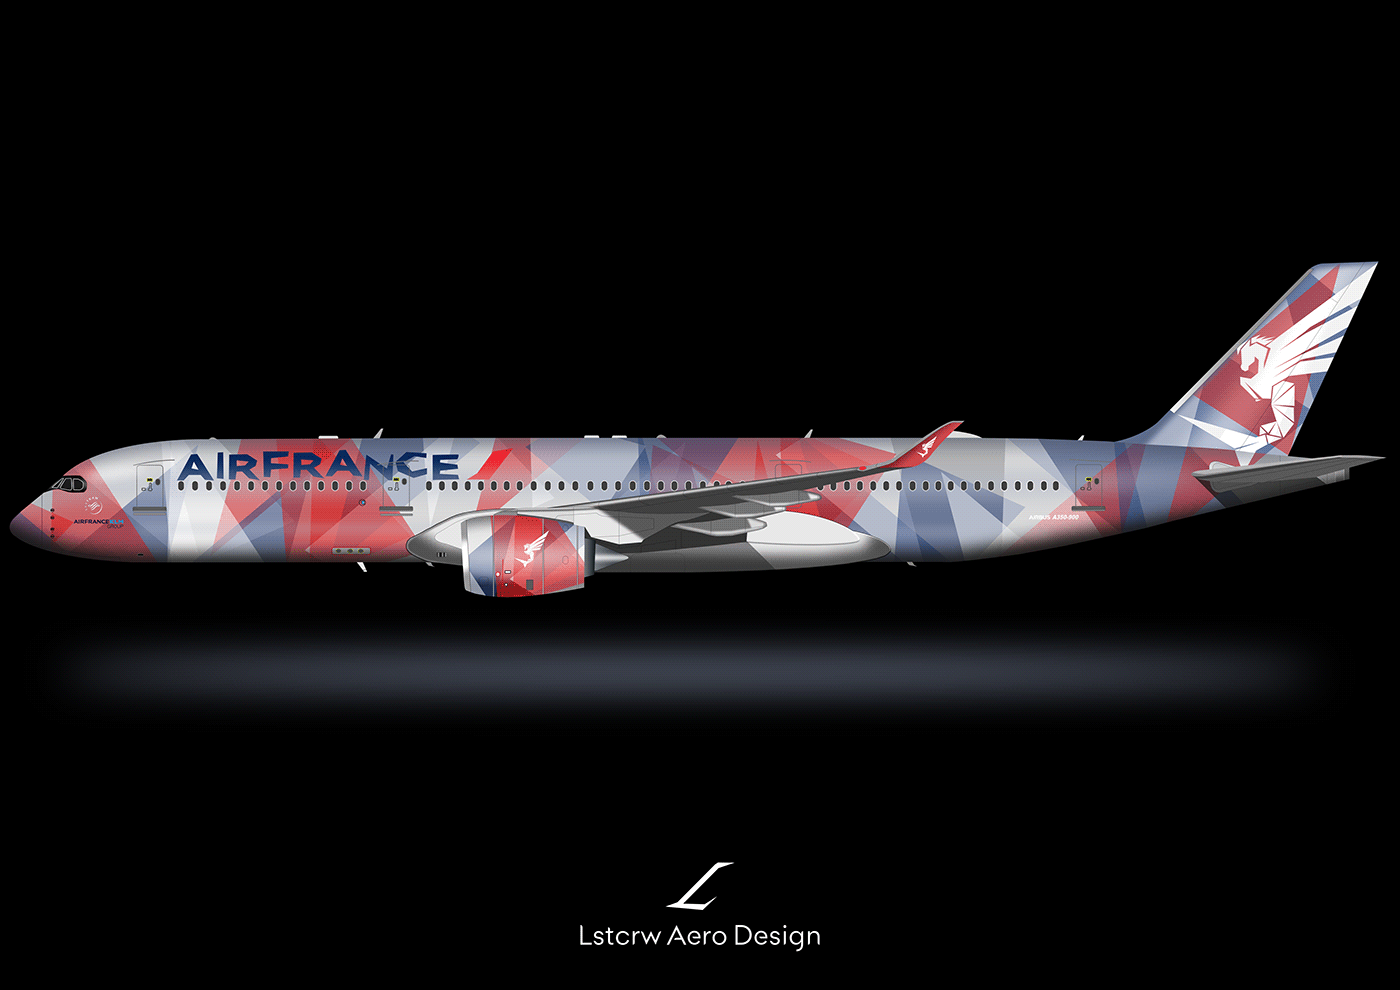 A350 Airbus airfrance JO2024 liveries Olympic Games paris2024